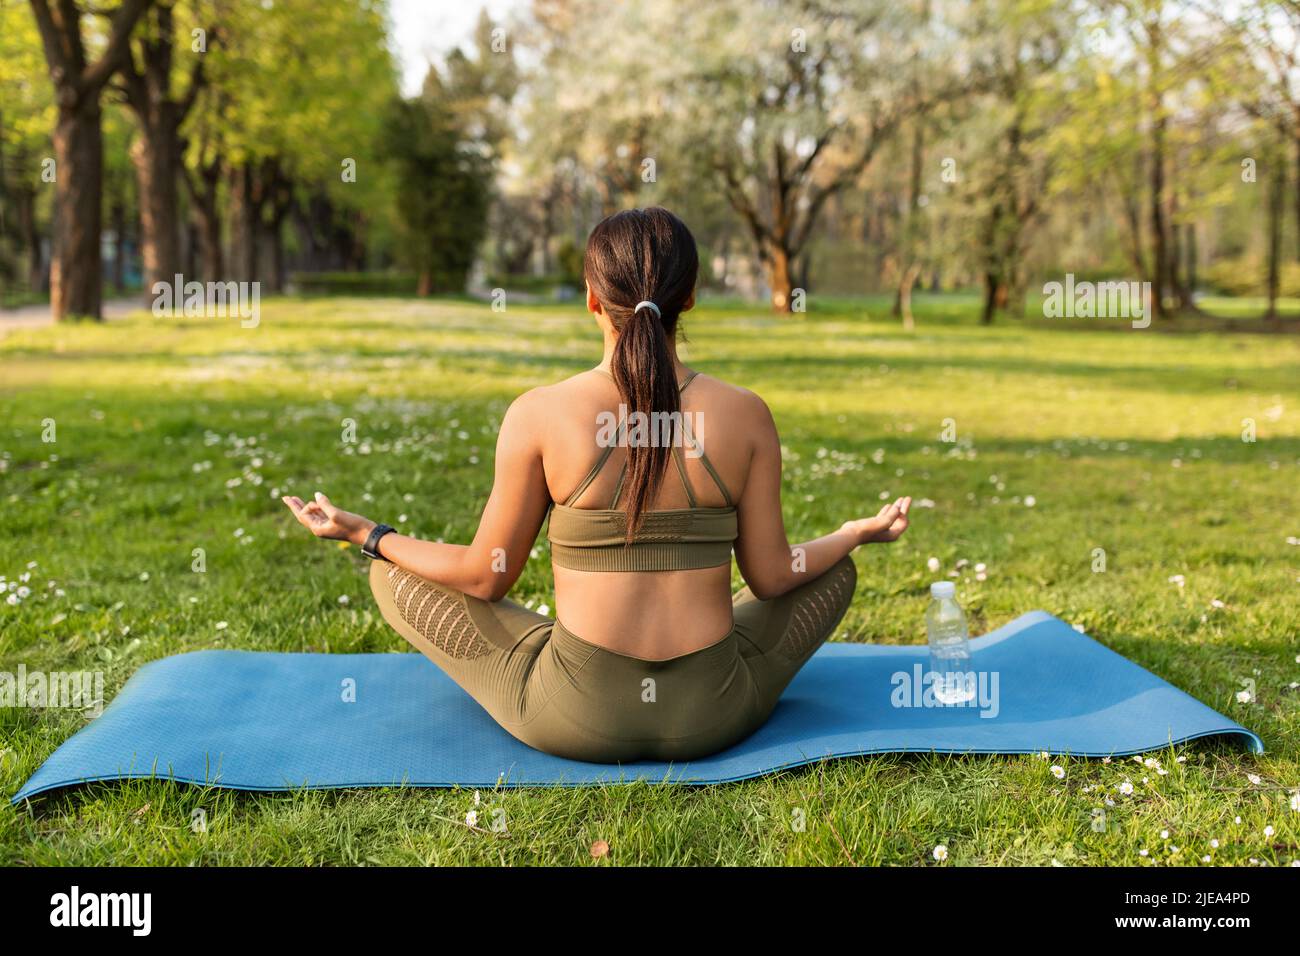 Back view of young black woman meditating in lotus pose, doing morning yoga practice, sitting on sports mat outdoors Stock Photo